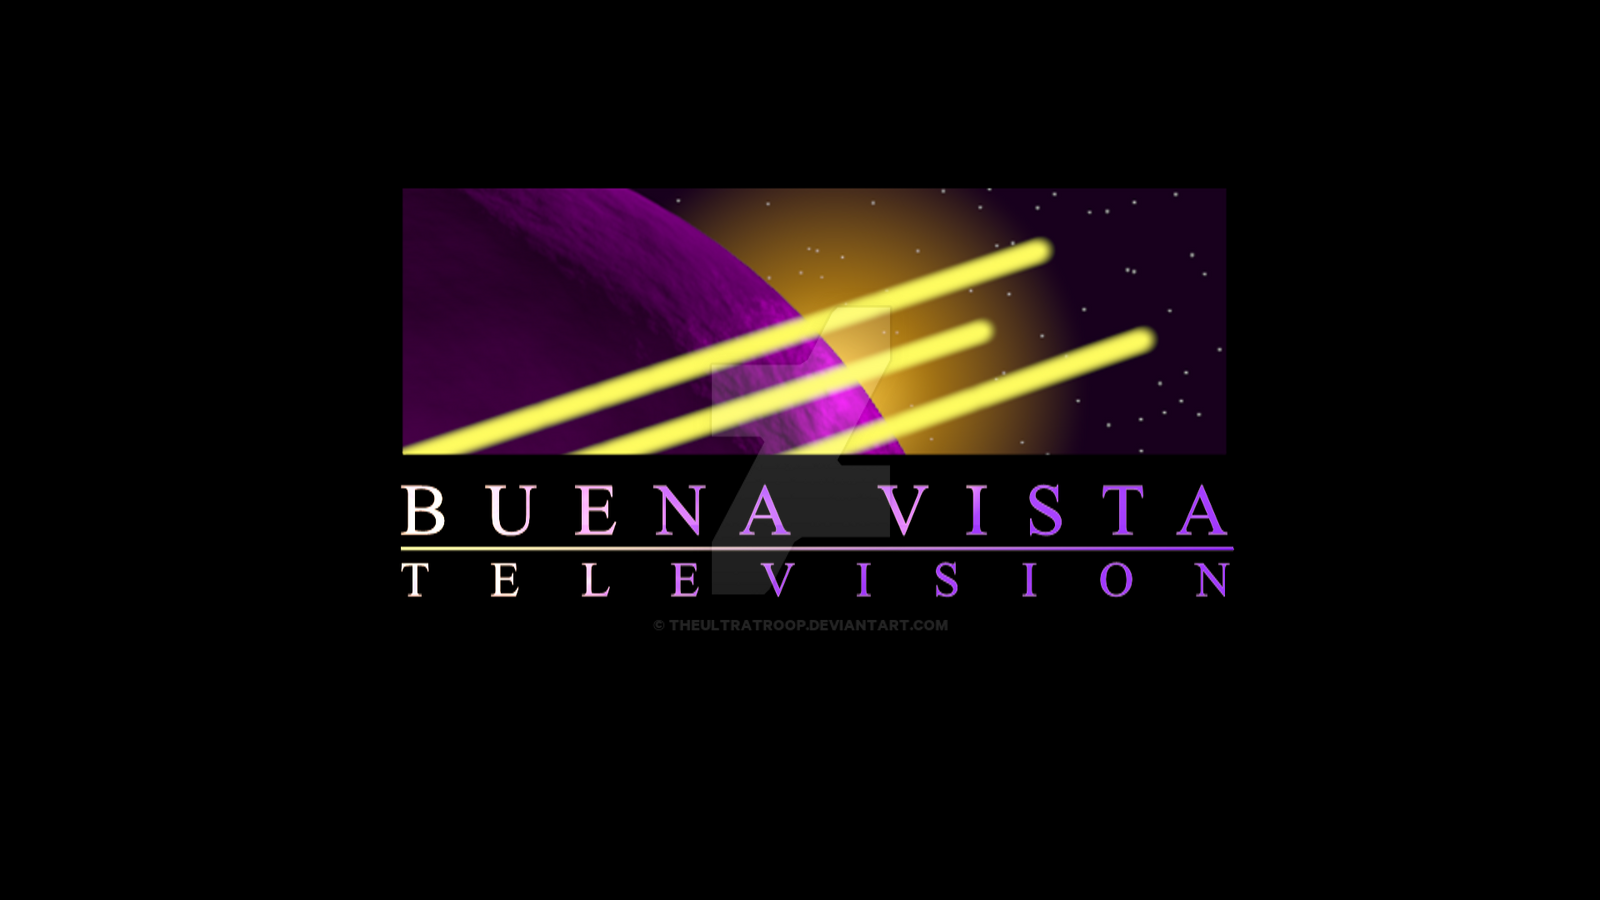 buena_vista_television_logo_remake_by_theultratroop d9cqcg2